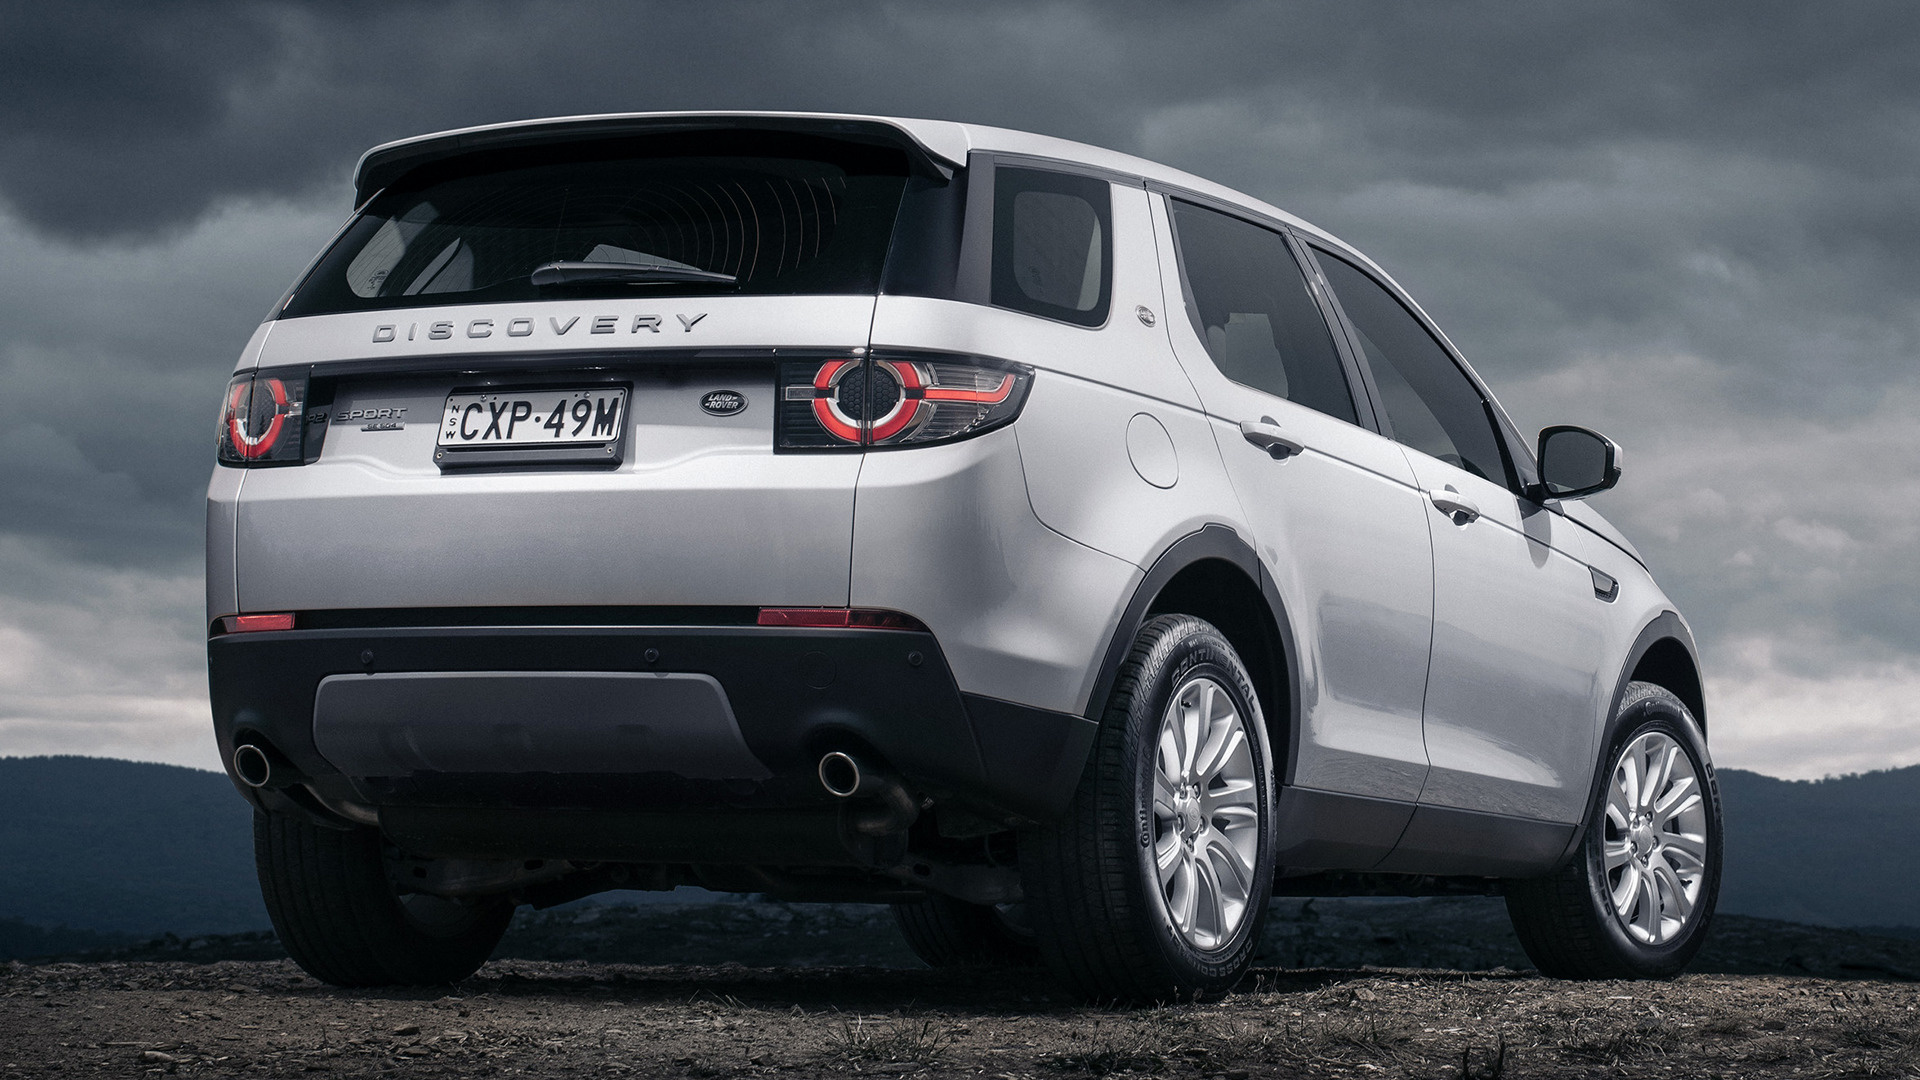 Discovery sport 2.0. Ленд Ровер Дискавери спорт 2017. Land Rover Discovery Sport 2.0 at, 2015. Land Rover Discovery Sport 2.0 td4 at se. Discovery Sport 4wd se auto 2015.